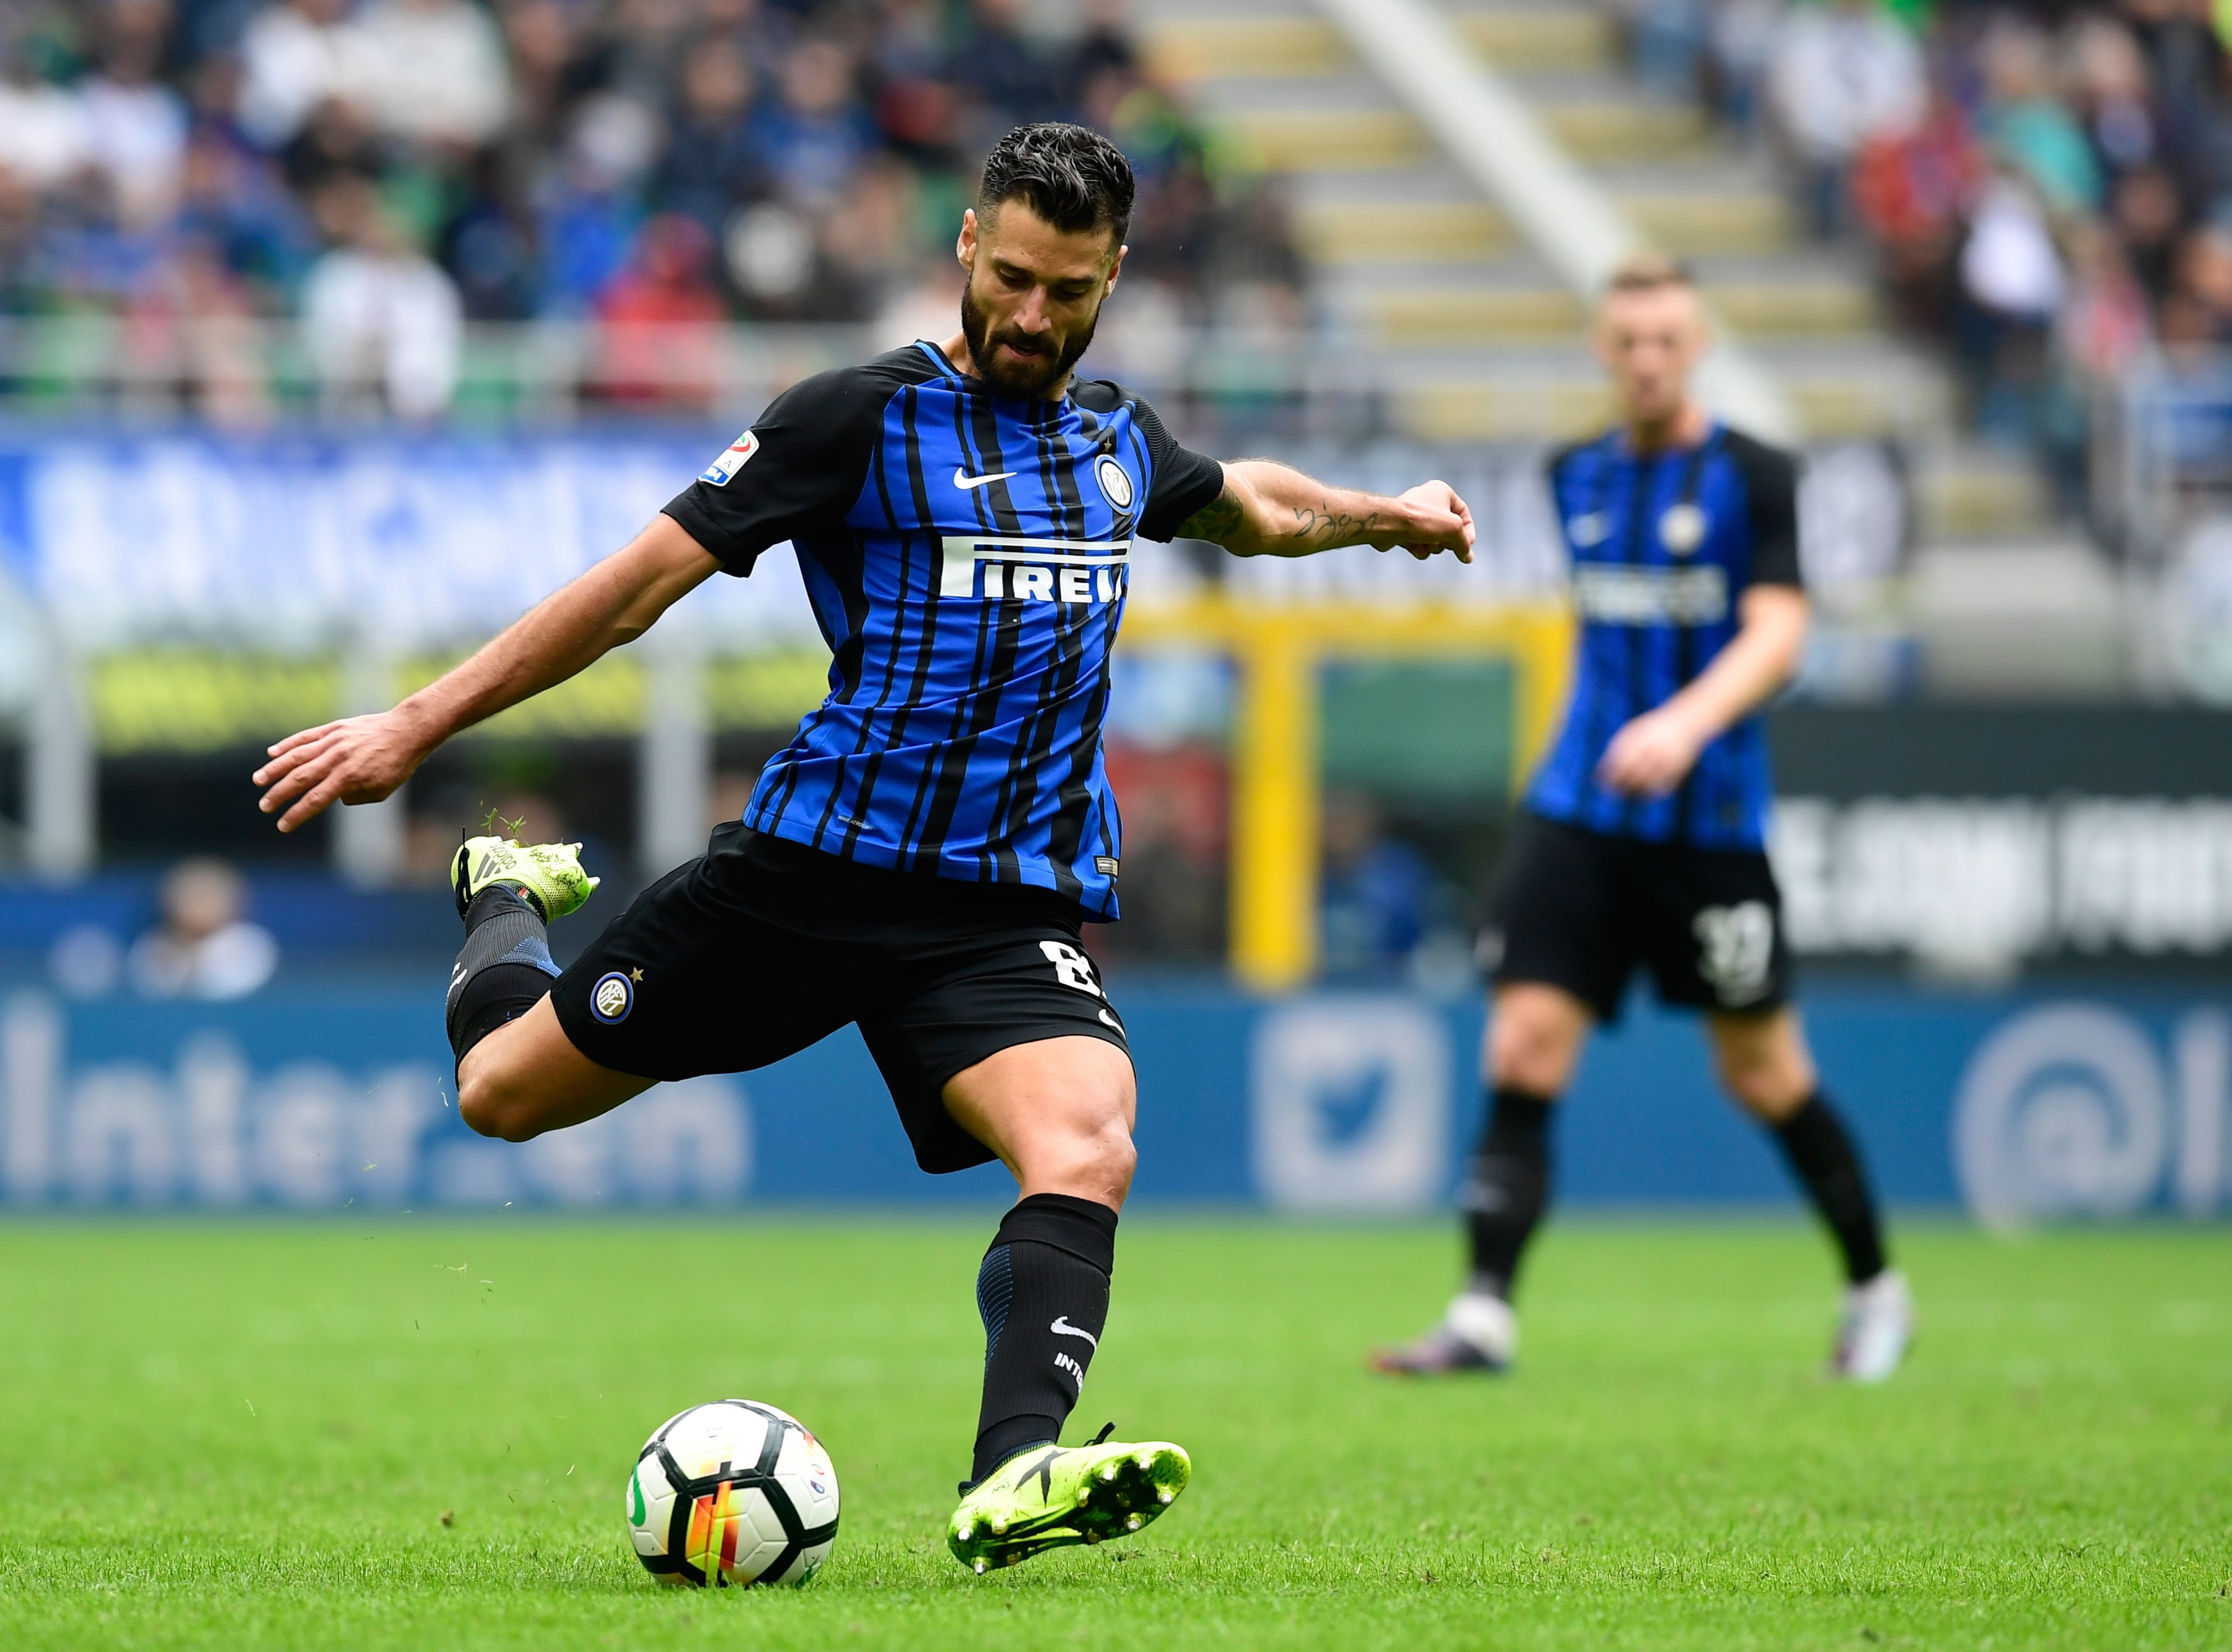 Inter Milan's Italian midfielder Antonio Candreva kicks the ball during the Italian Serie A football match between Inter Milan and Spal at San Siro Stadium in Milan on September 10, 2017. / AFP PHOTO / MIGUEL MEDINA        (Photo credit should read MIGUEL MEDINA/AFP/Getty Images)